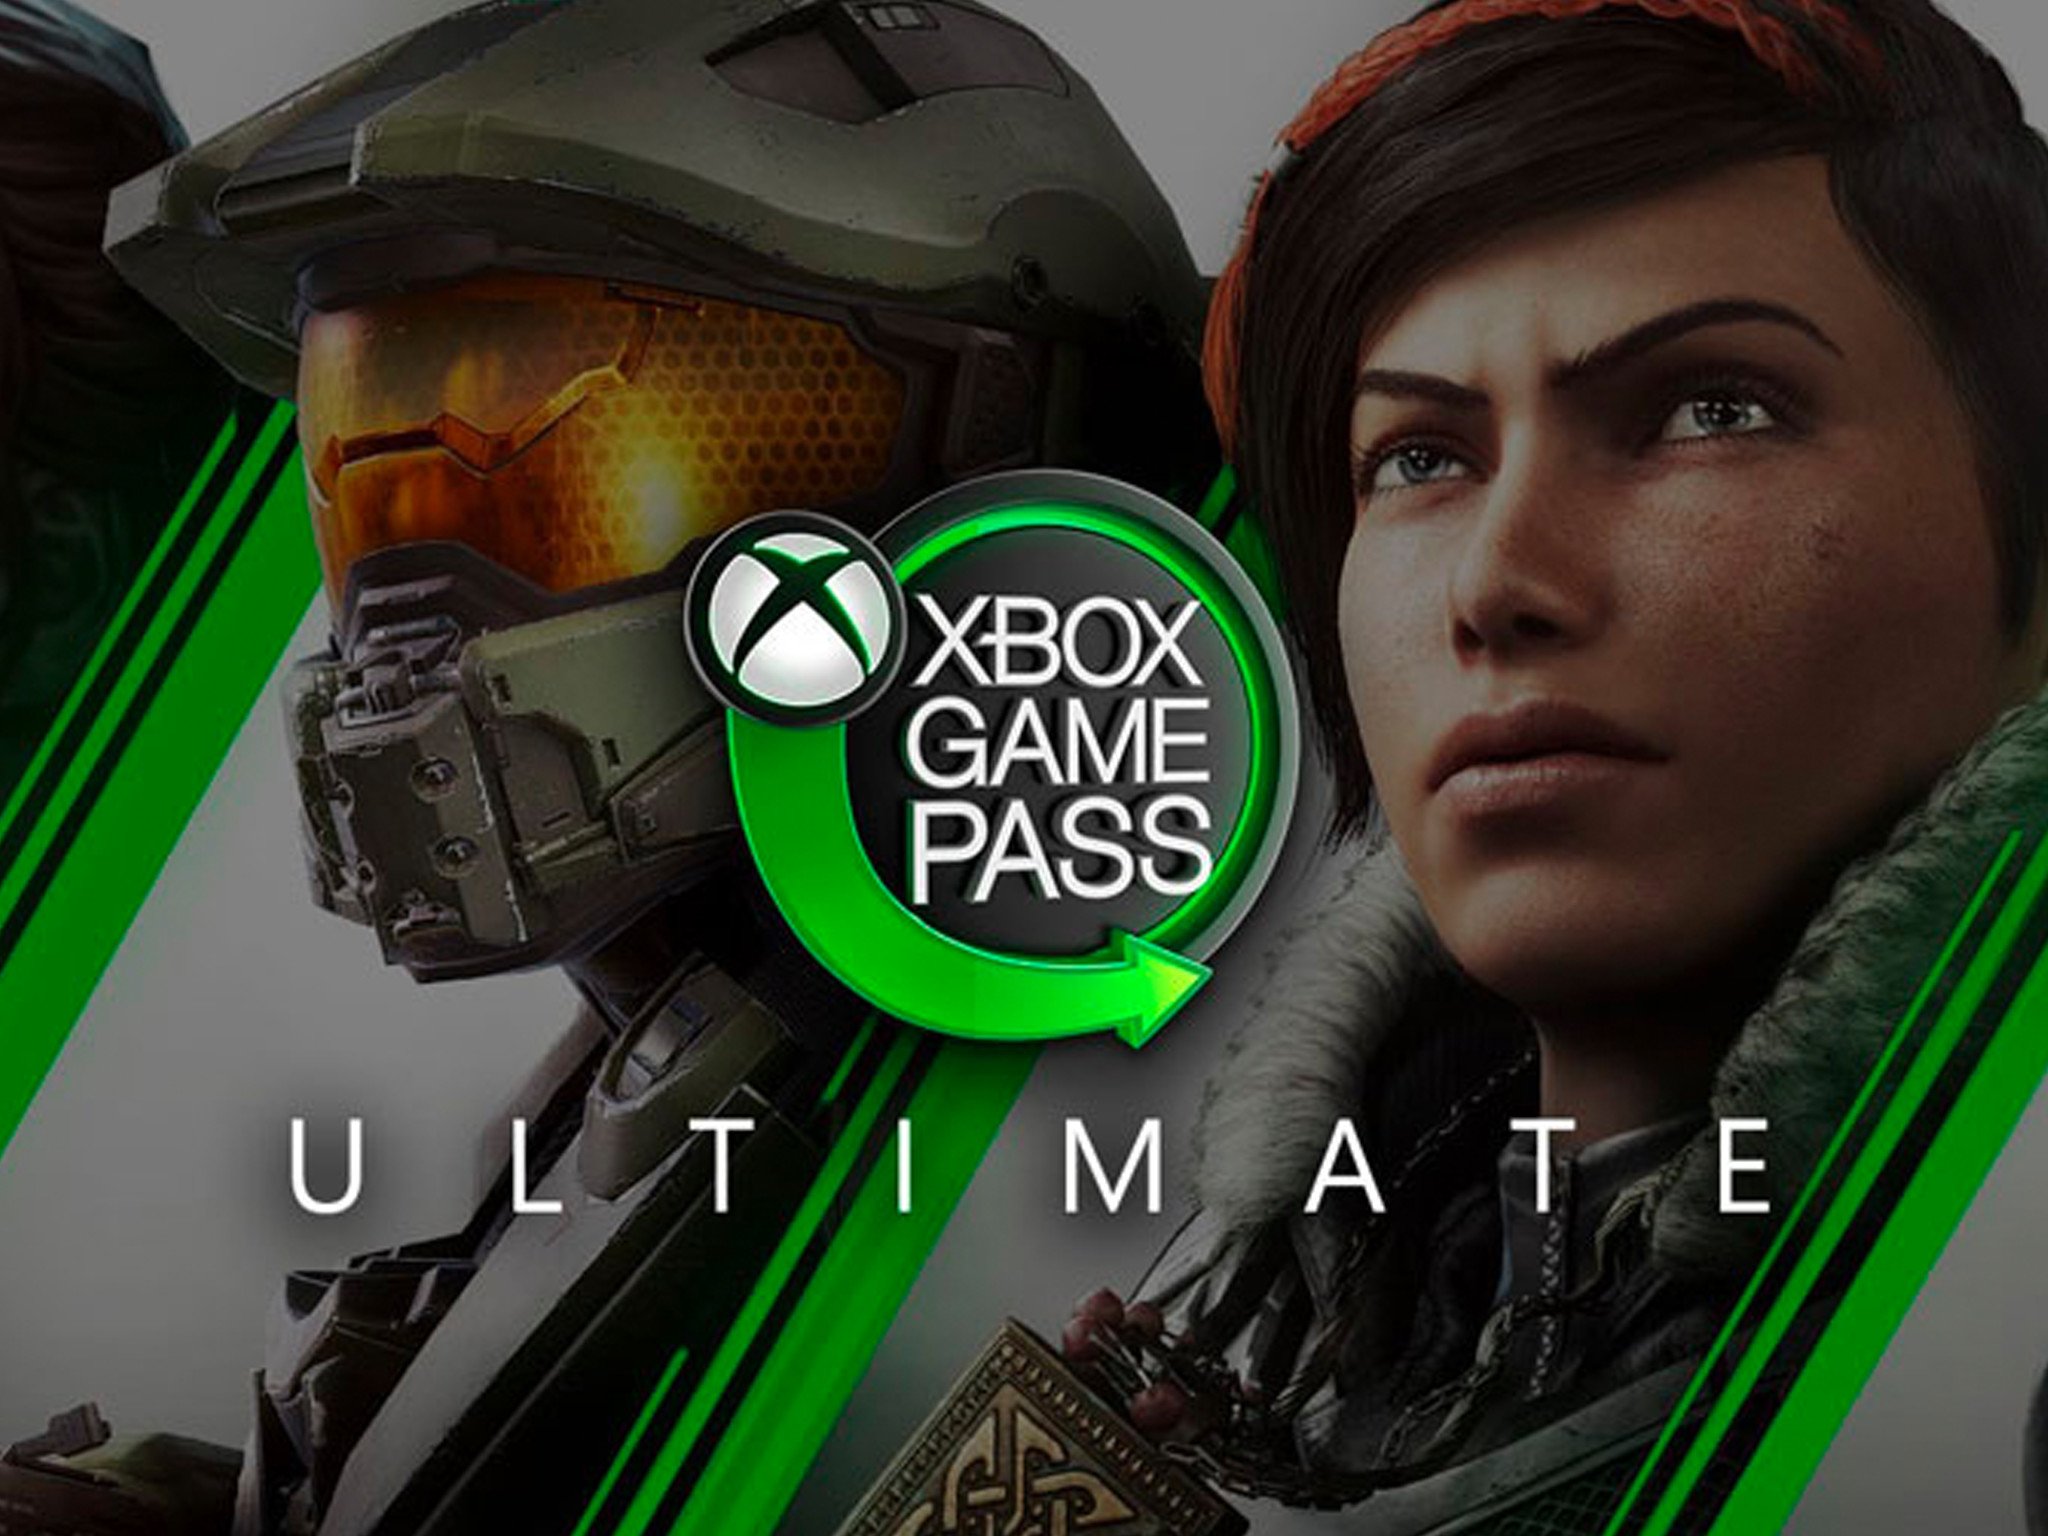 X games pass. Xbox Ultimate. Game Pass Ultimate. Xbox game Pass. Xbox Ultimate game.